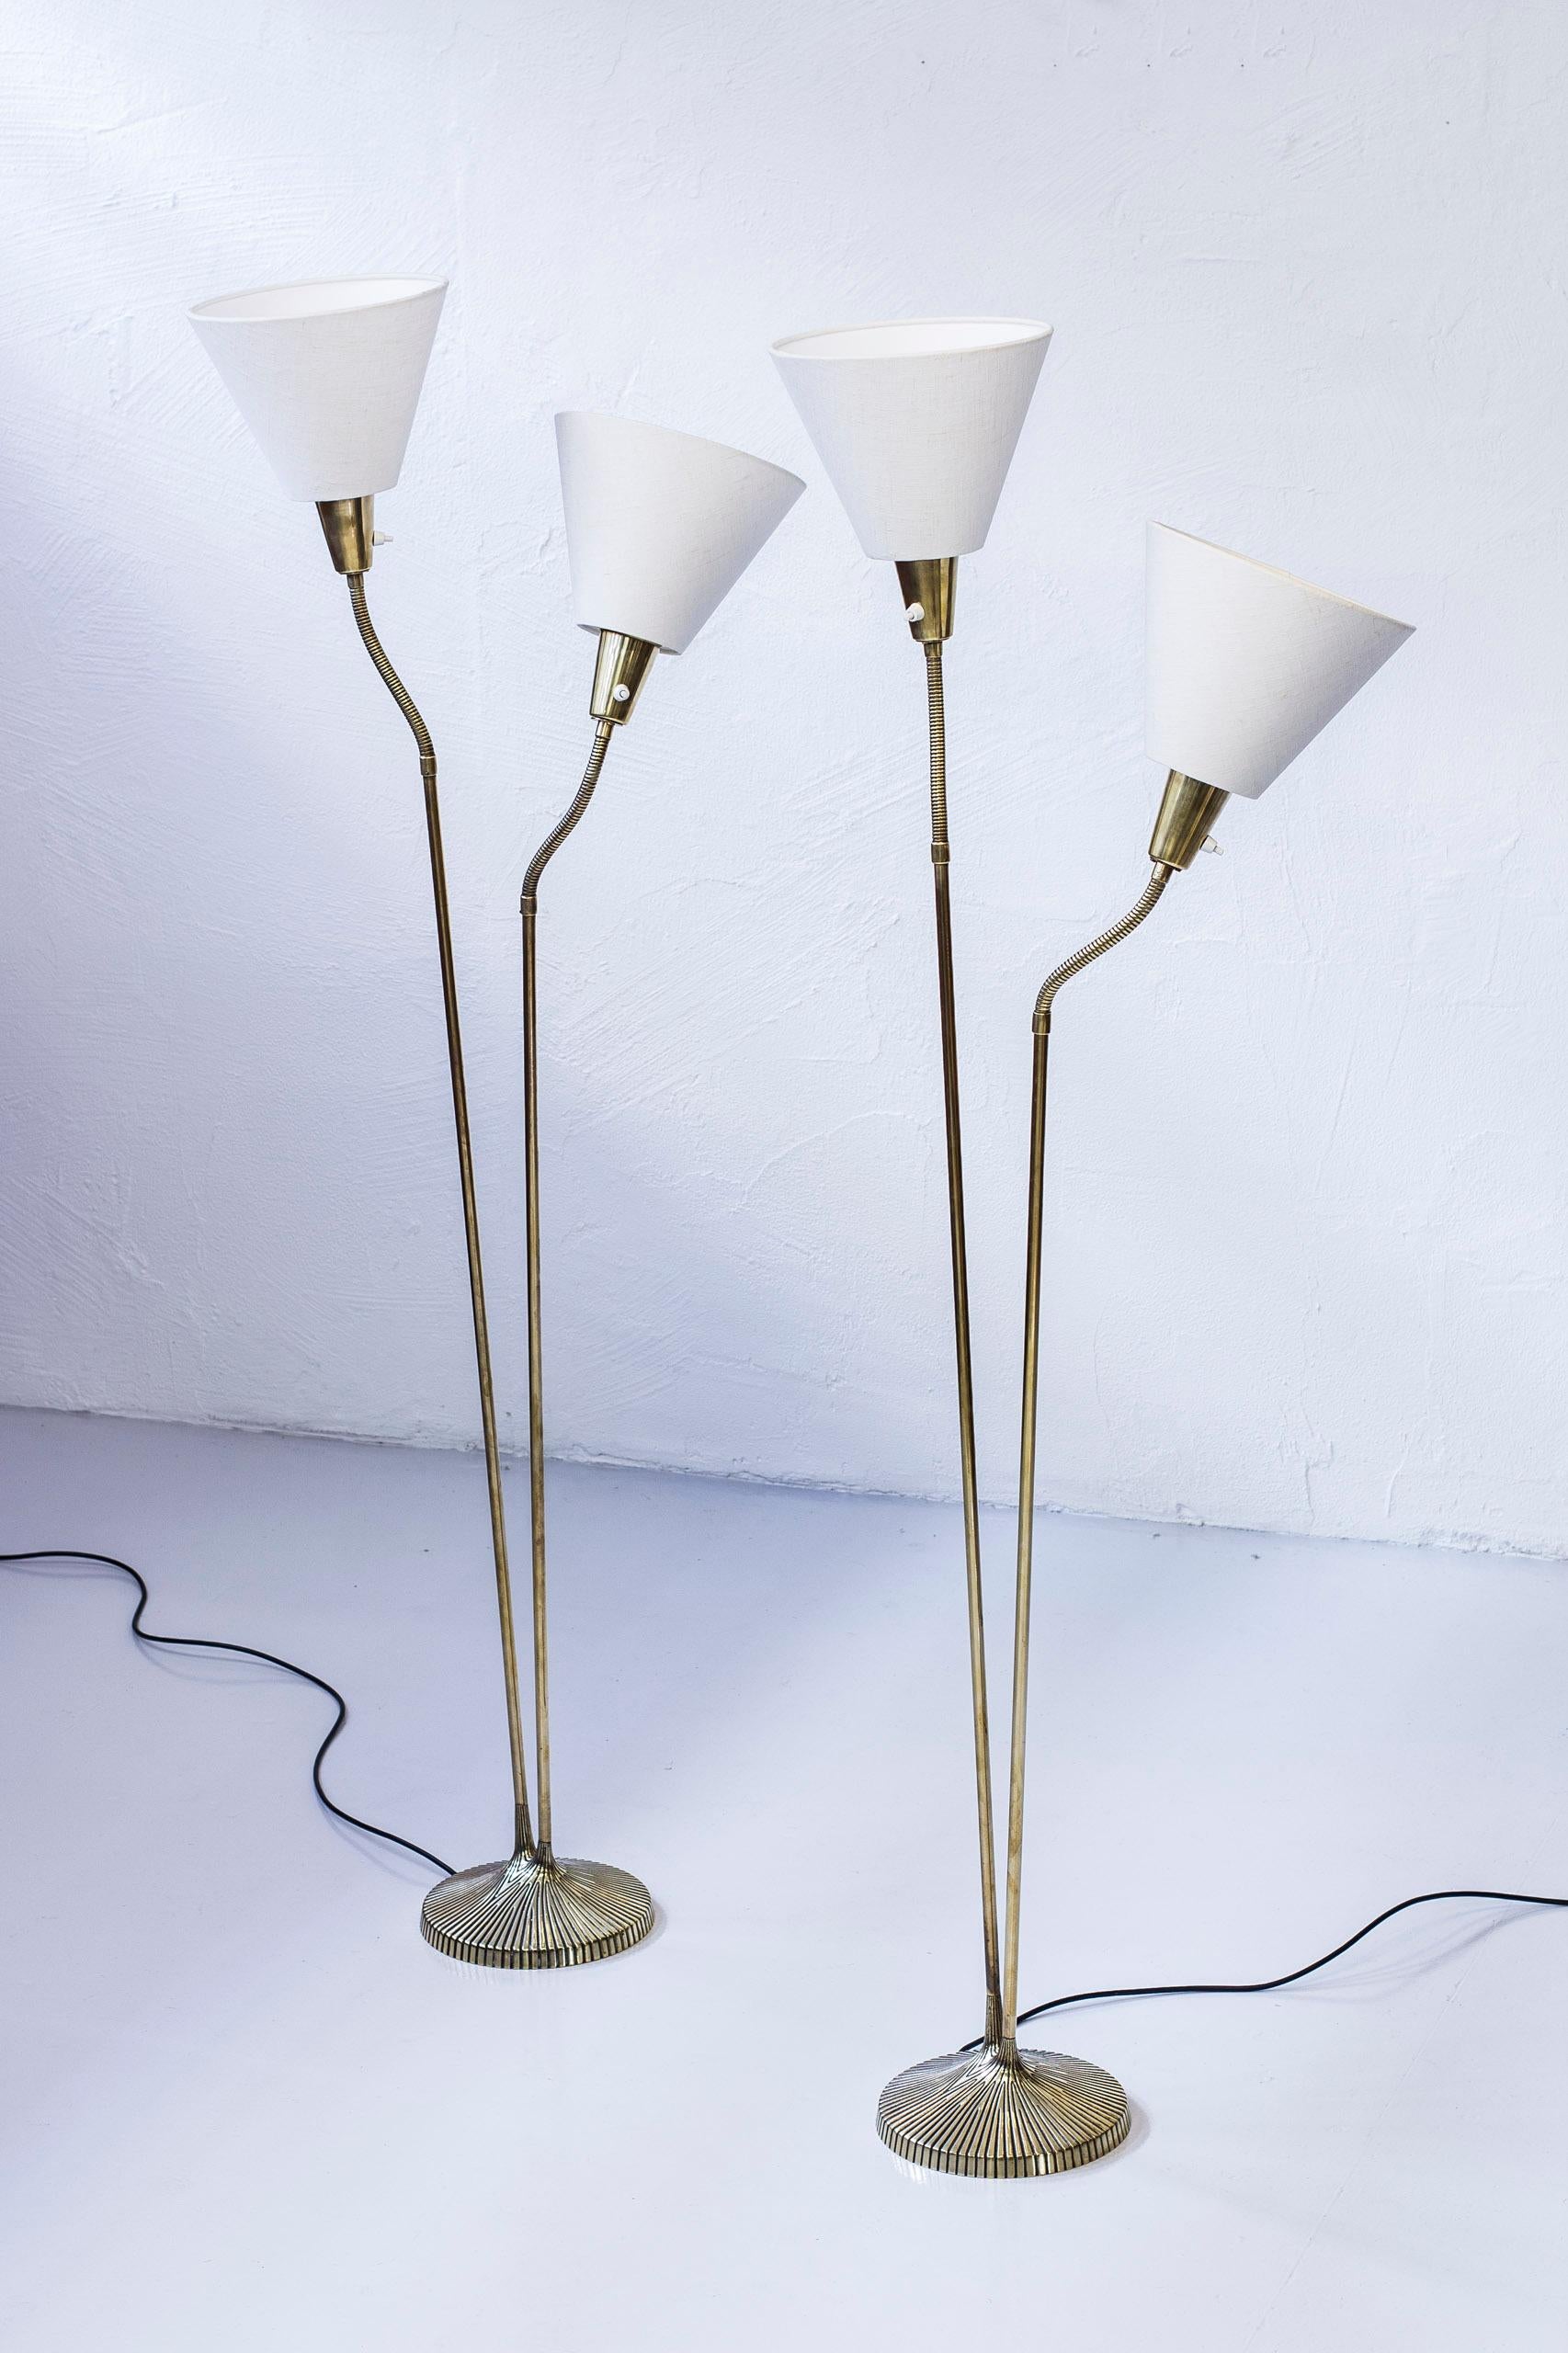 Pair of floor lamps designed by Sonja Katzin. Produced by ASEA belysning in the 1950s. Made from solid brass with off-white cotton fabric shades. Light switches on all the lamp fixtures in working order. Good condition with few signs of age related